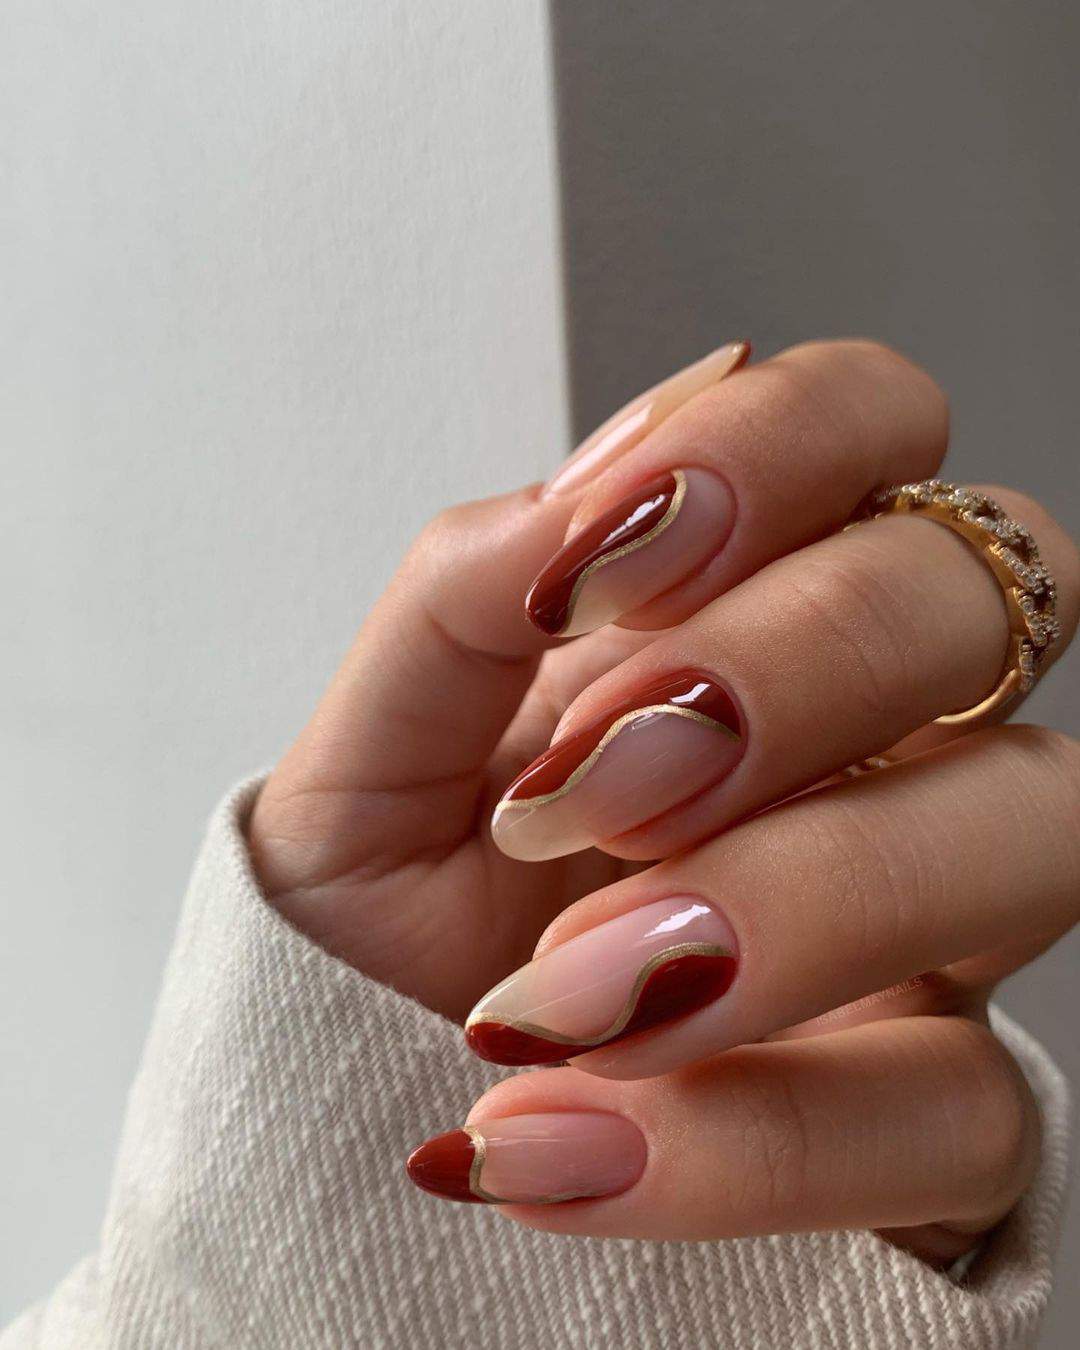 35 Cute Summer Nails To Rock For Women In 2021 images 12